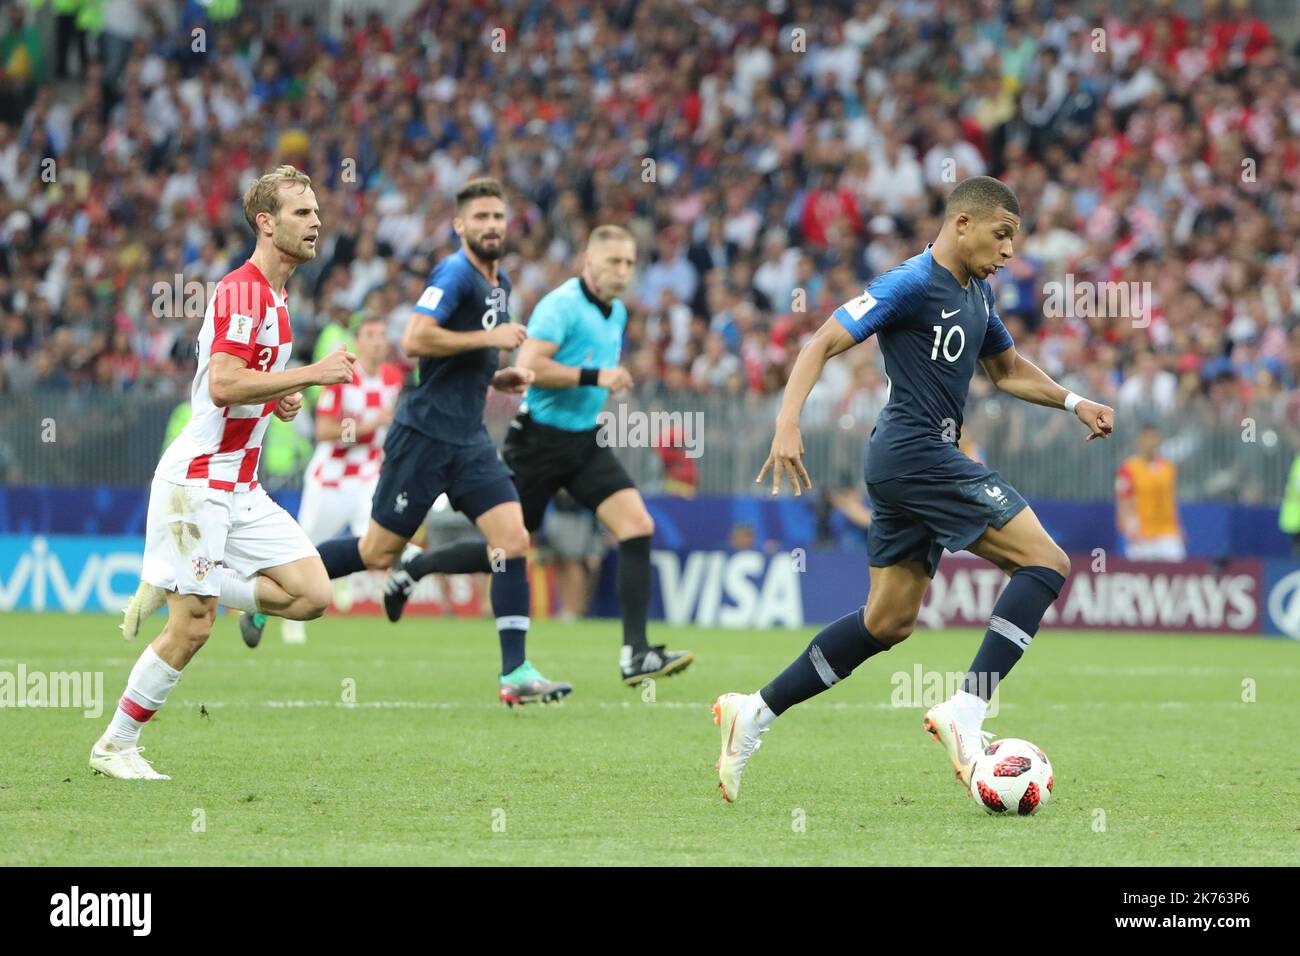 FIFA World Cup Russia 2018, Final Football Match France versus Croatia, France is the new World Champion. France won the World Cup for the second time 4???2 against Croatia. Pictured: Kylian Mbappe plays the ball. © Pierre Teyssot / Maxppp Stock Photo